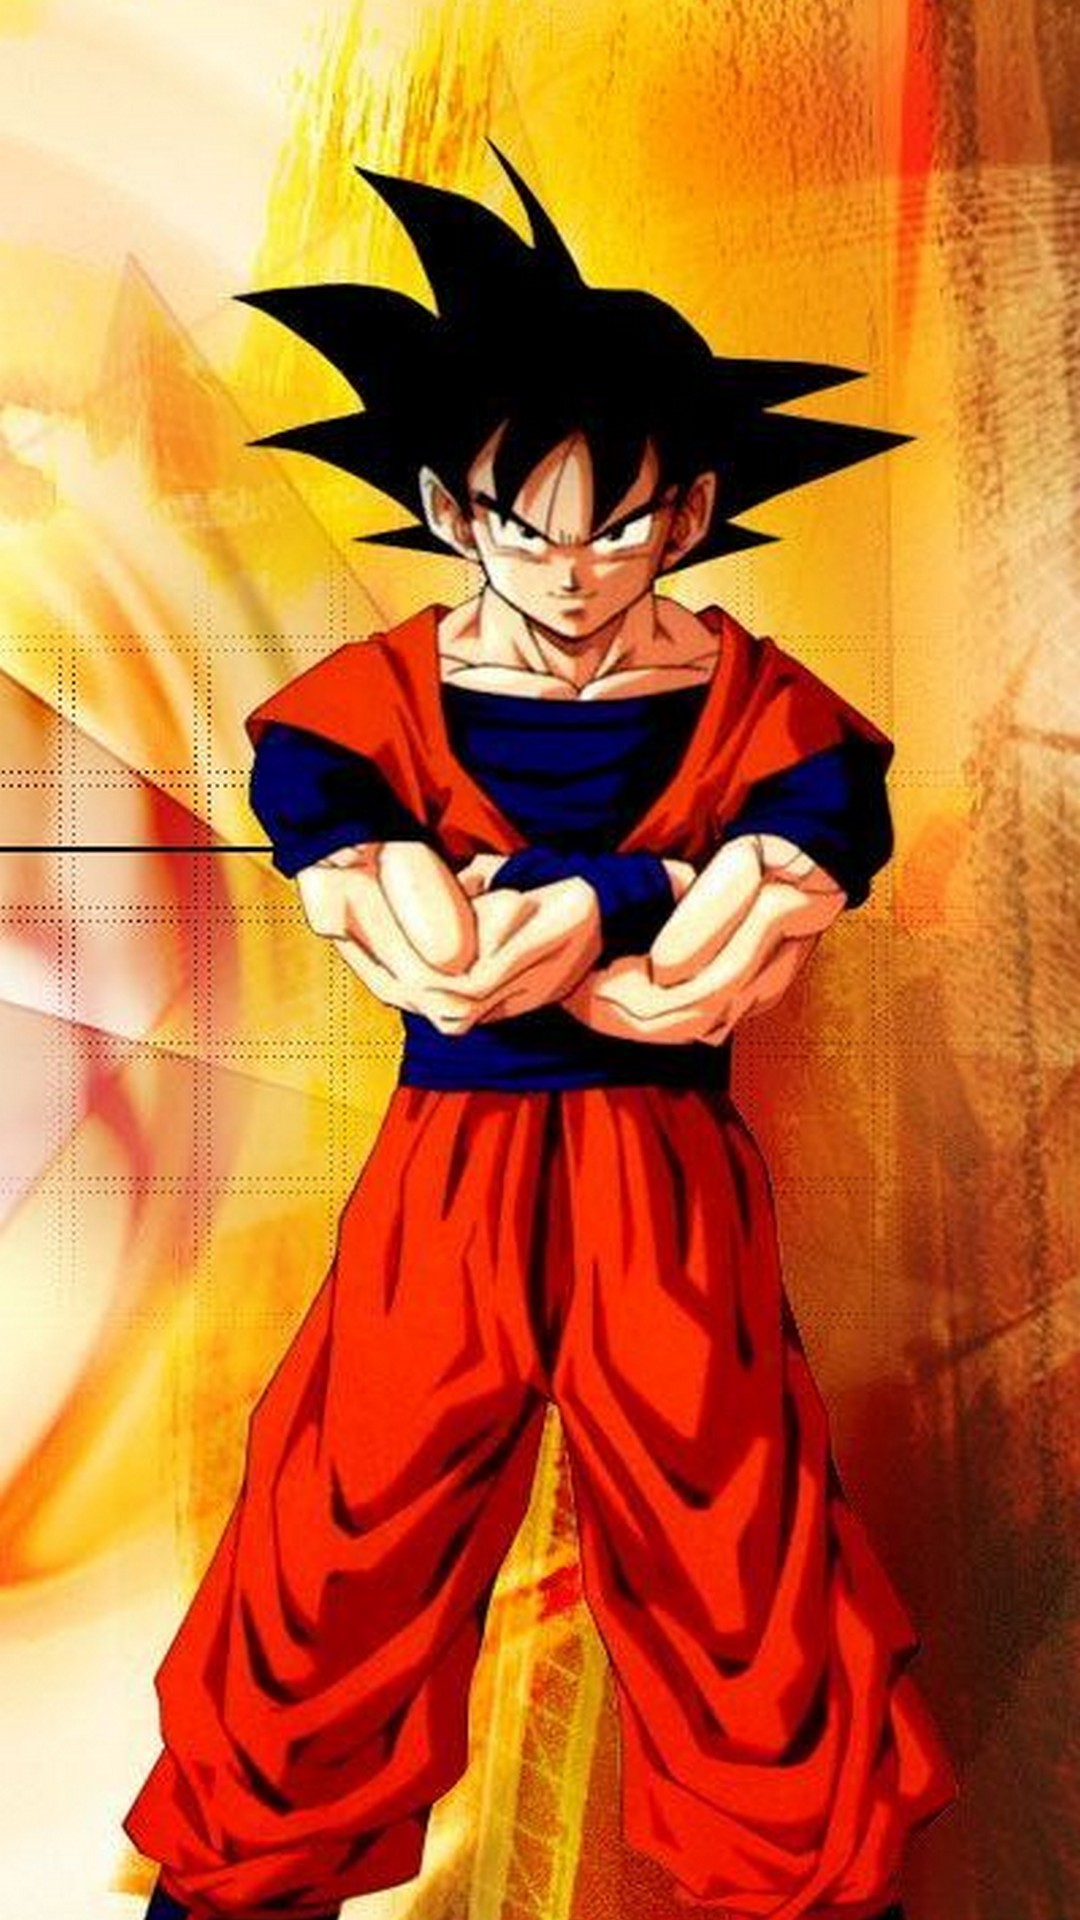 Goku Imagenes HD Wallpapers For Android with HD resolution 1080x1920